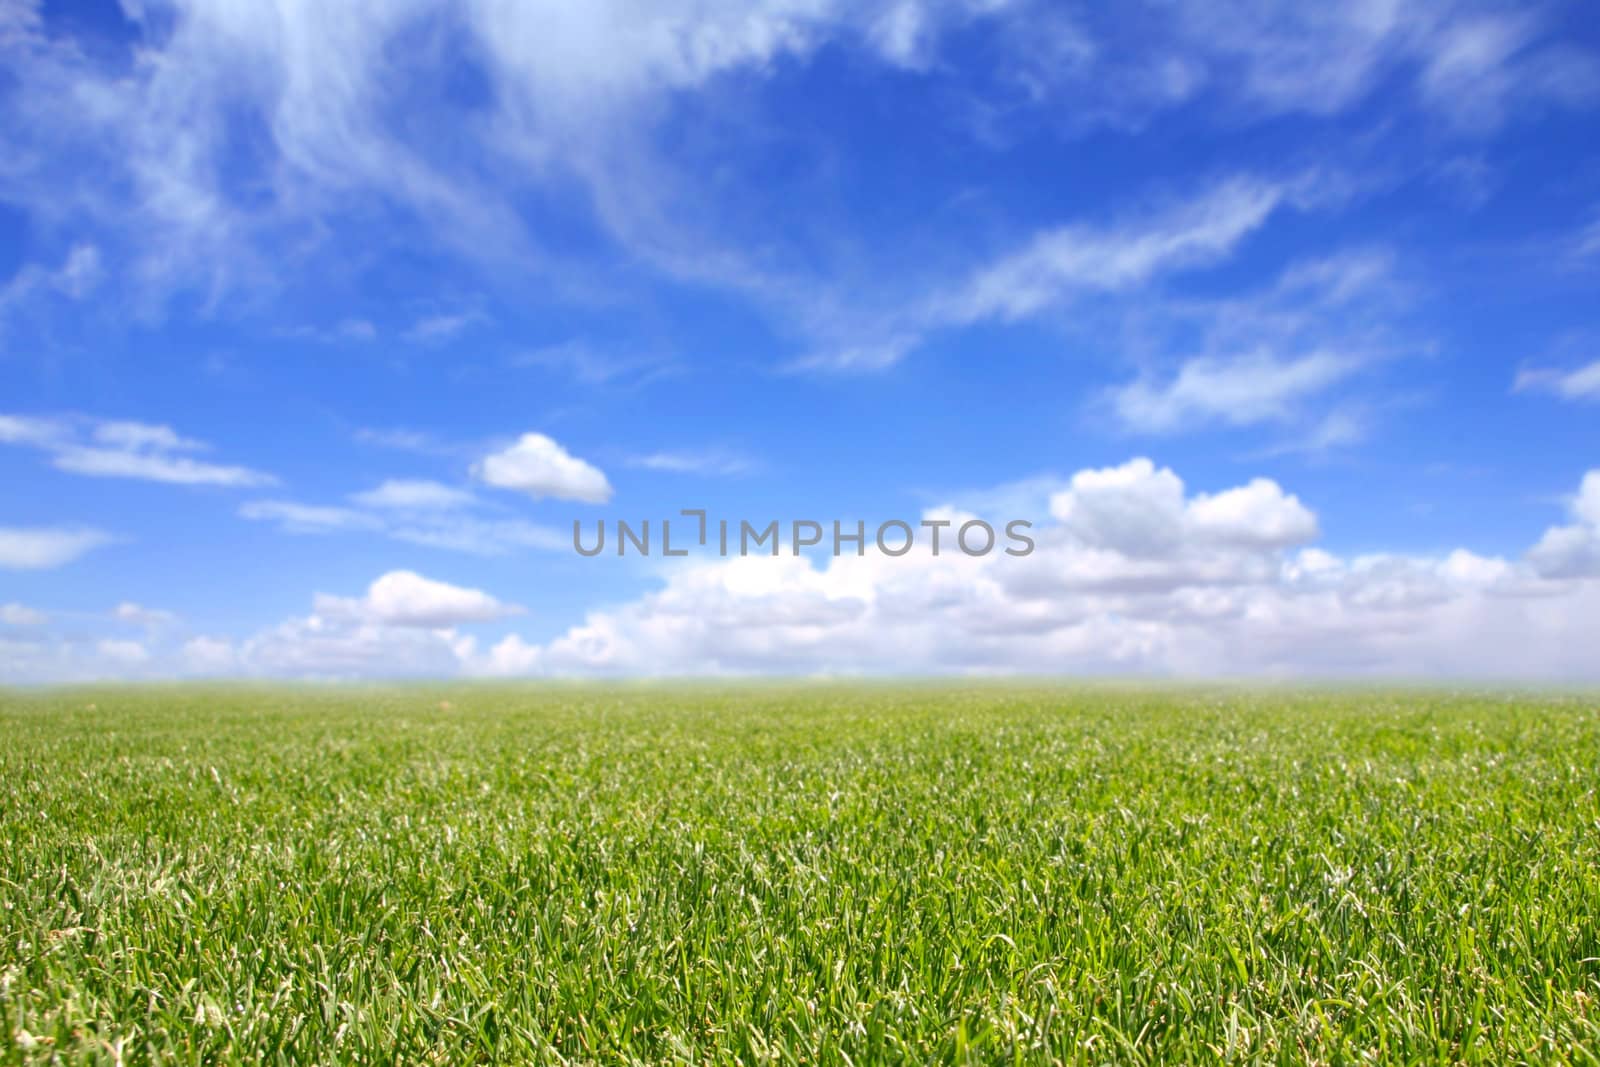 Beautiful Field of Green Grass and Blue Cloudy Sky. Front of Grass is in Focus With Intentional Extreme Depth of Field